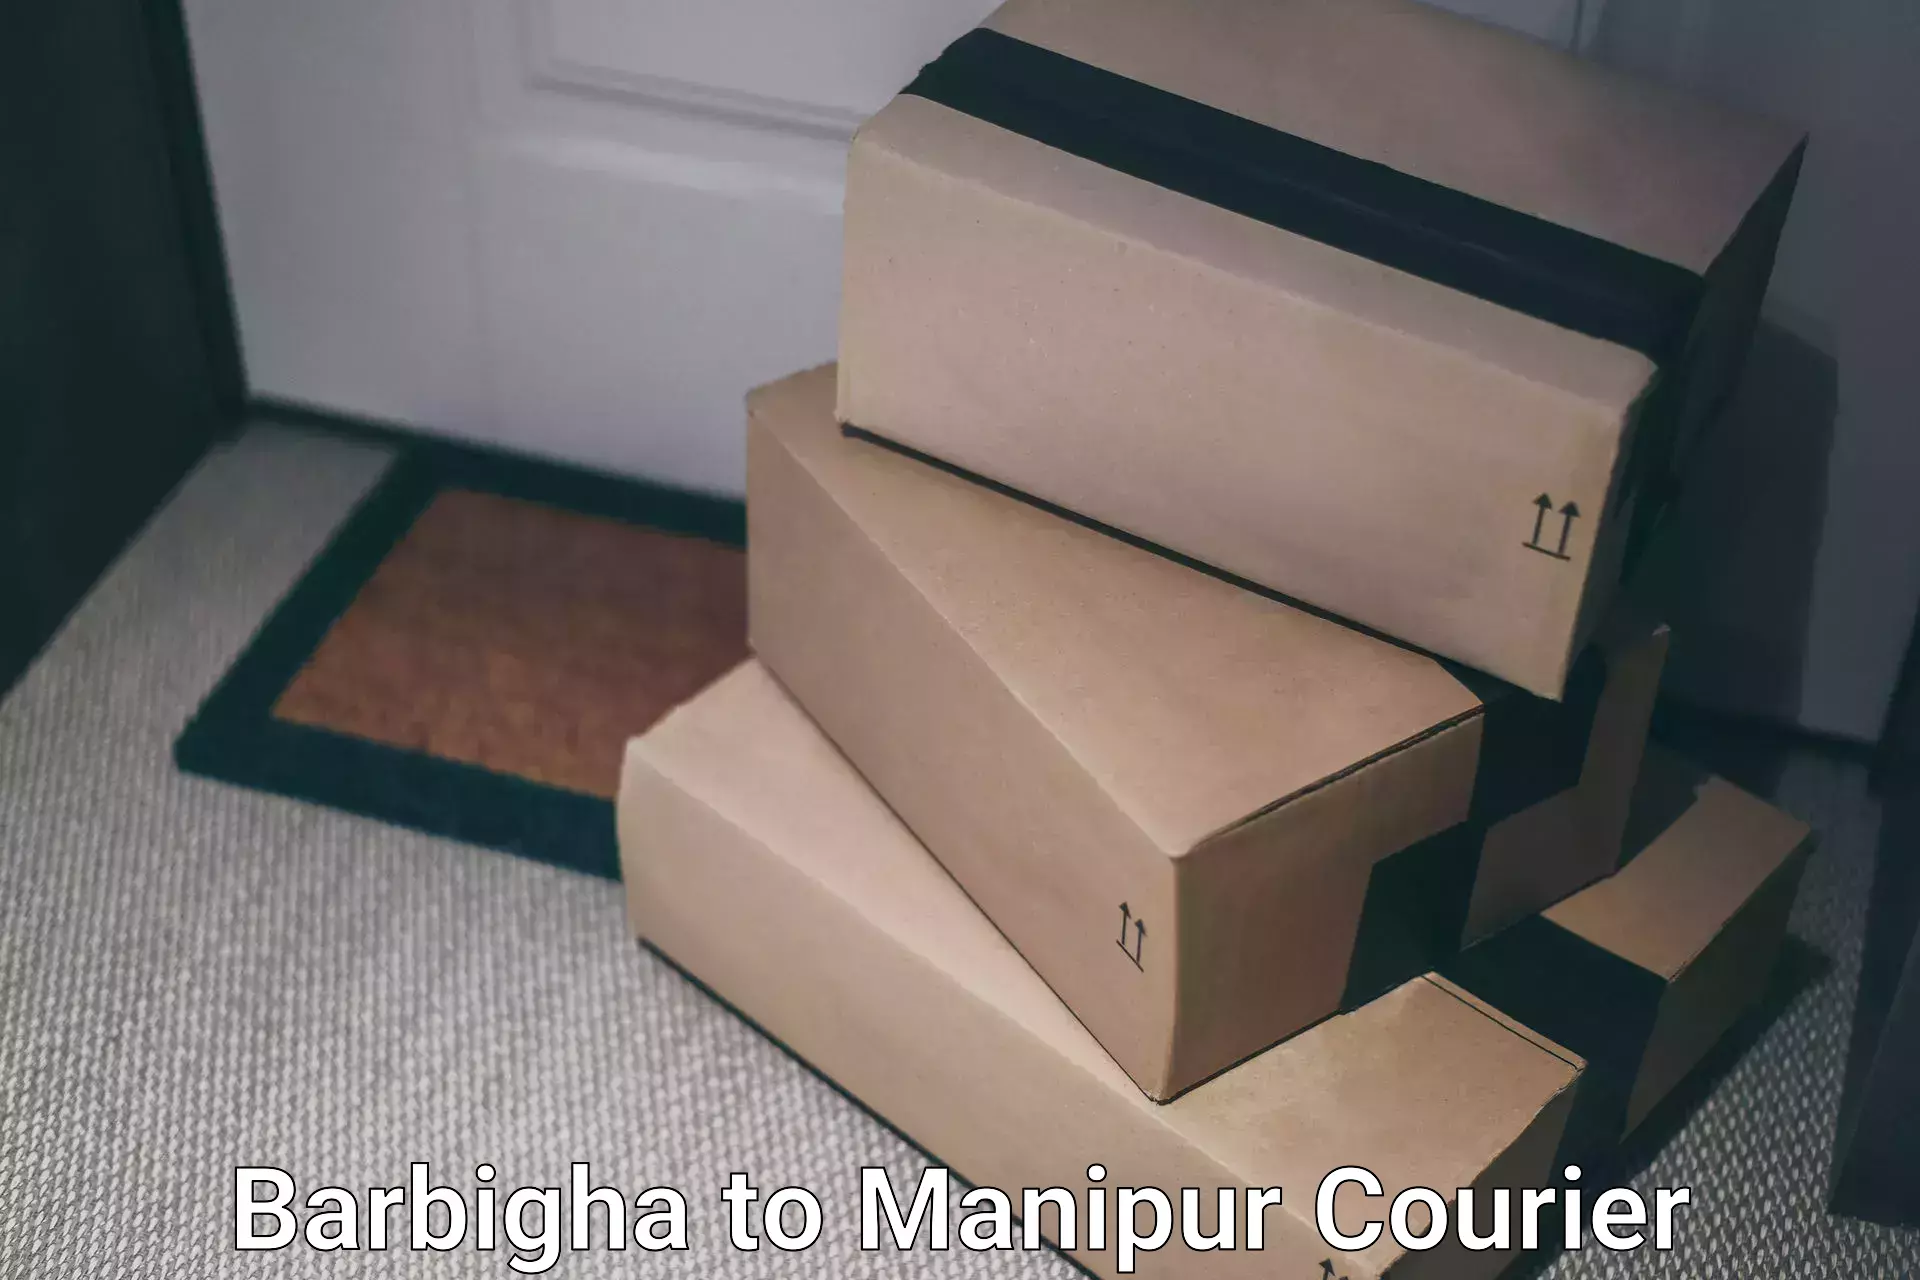 Express delivery capabilities Barbigha to Moirang